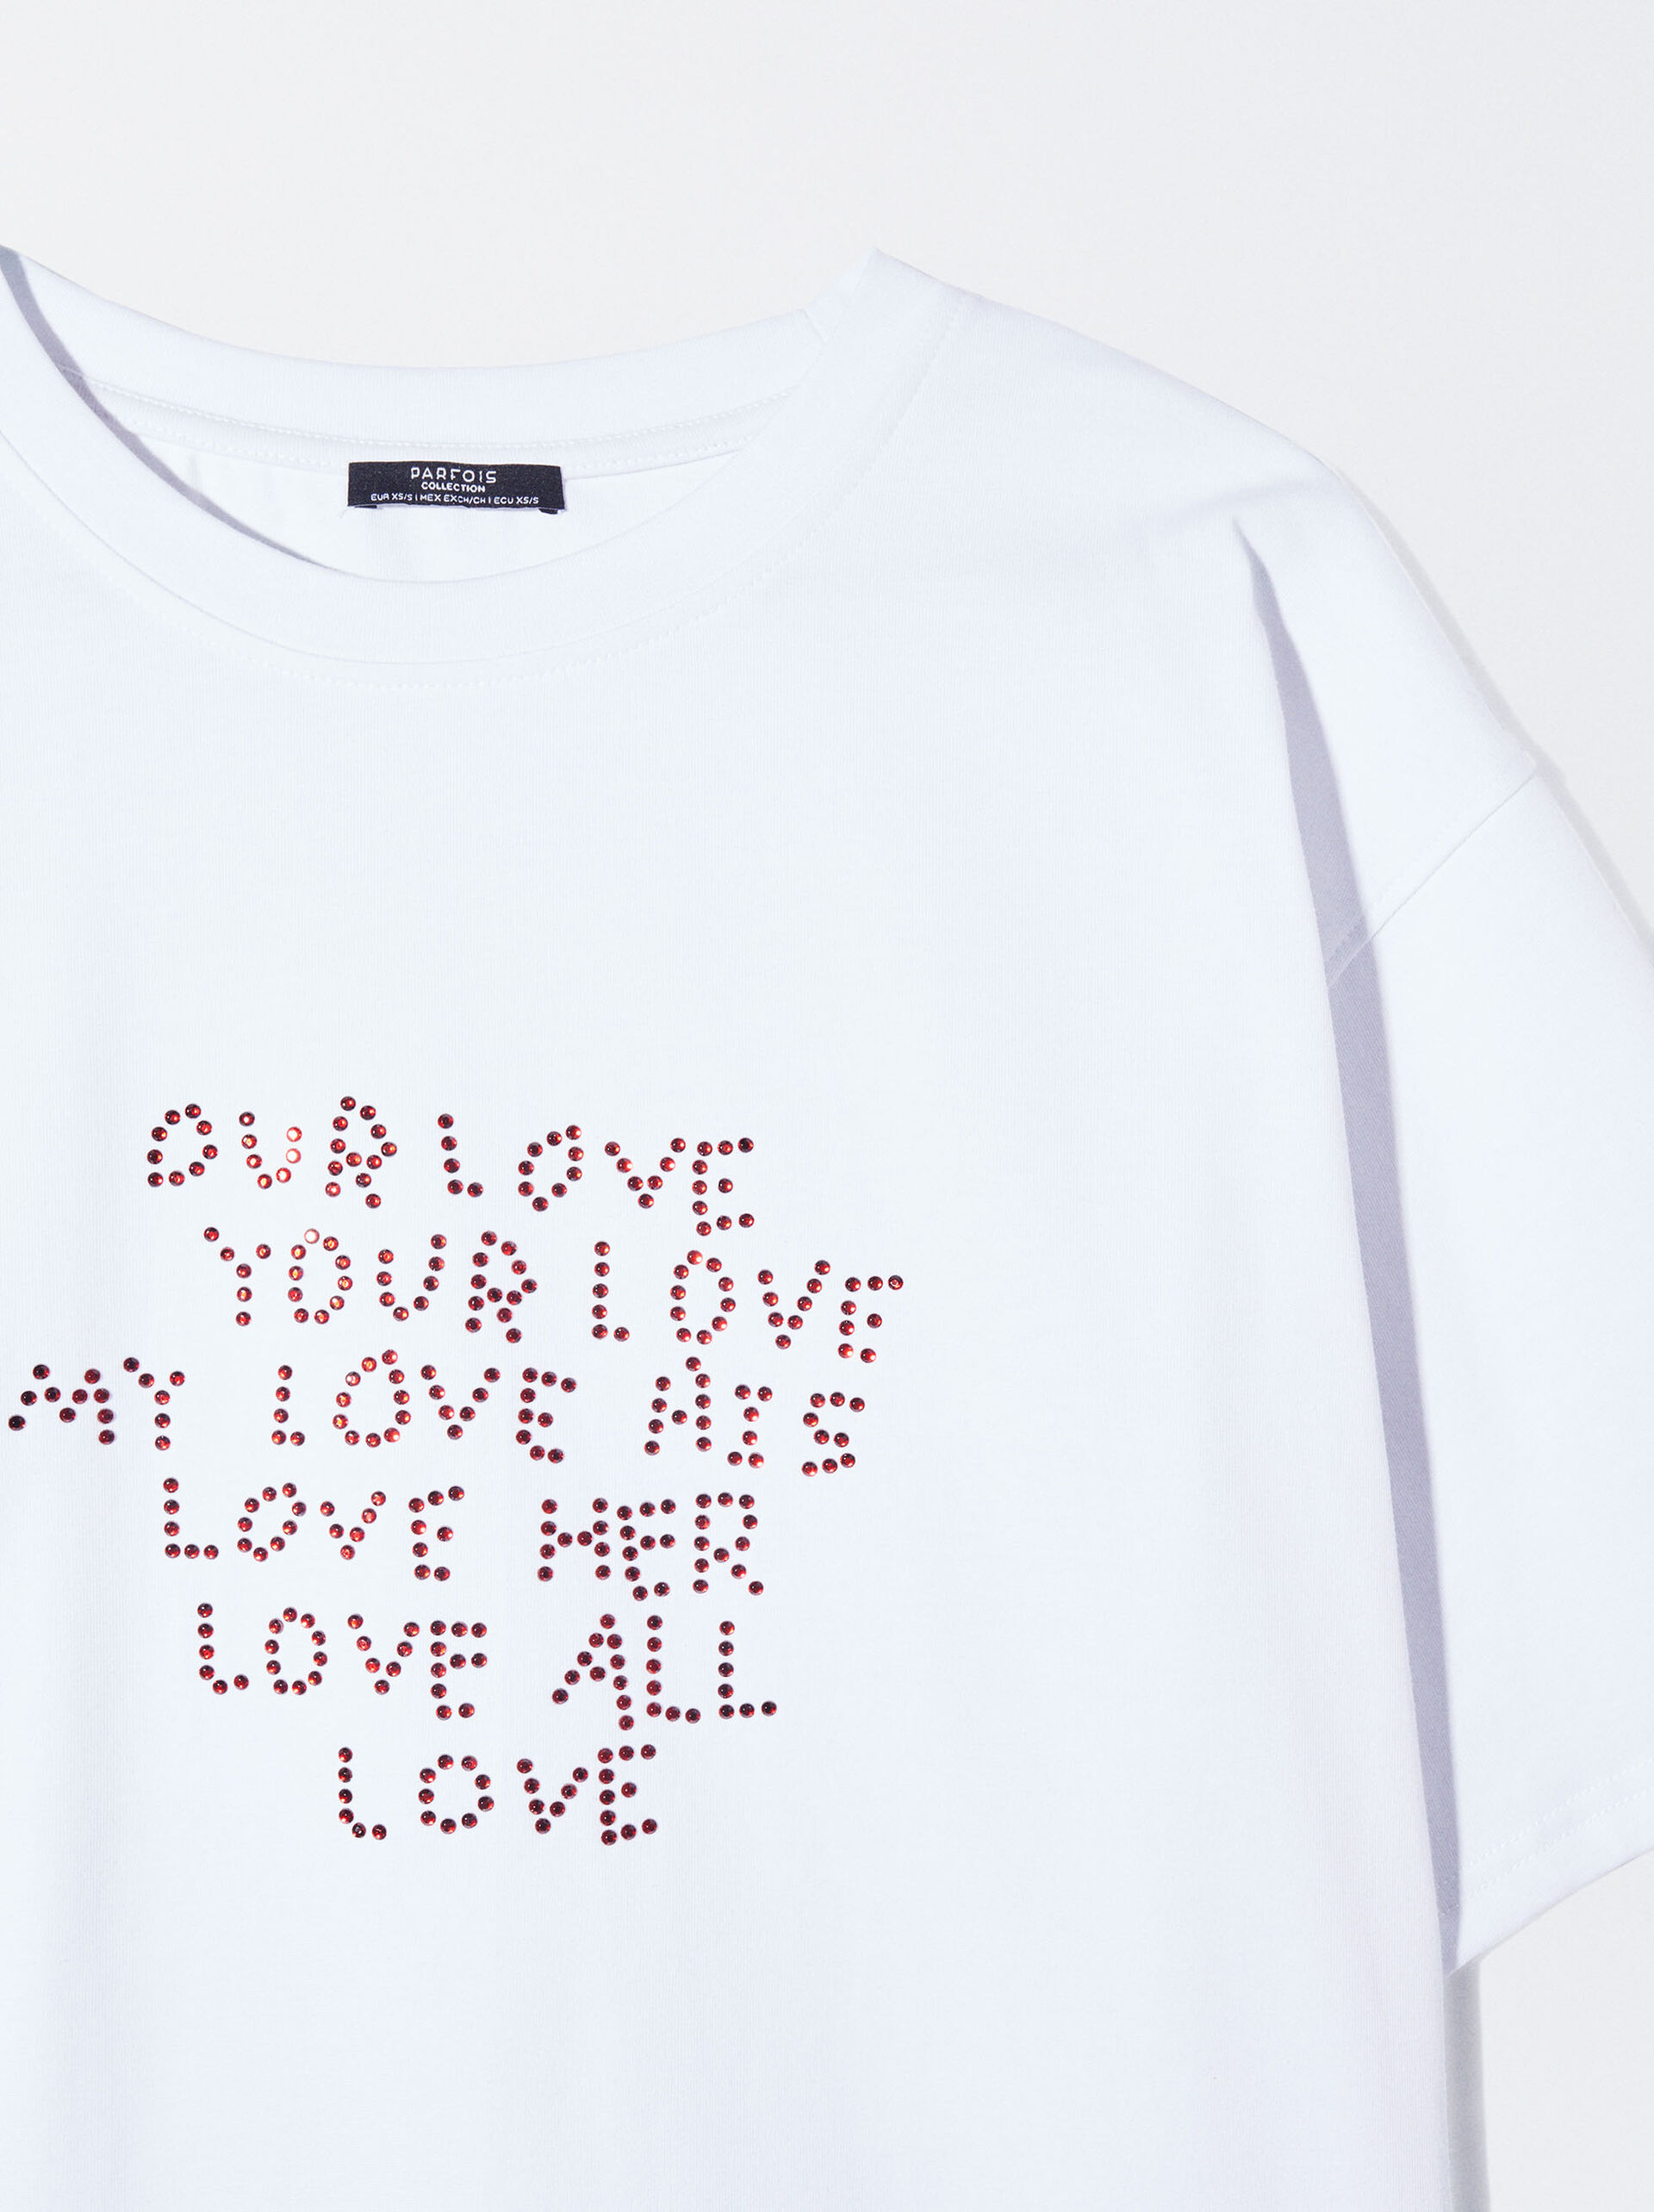 Online Exclusive - Cotton T-Shirt Love image number 6.0